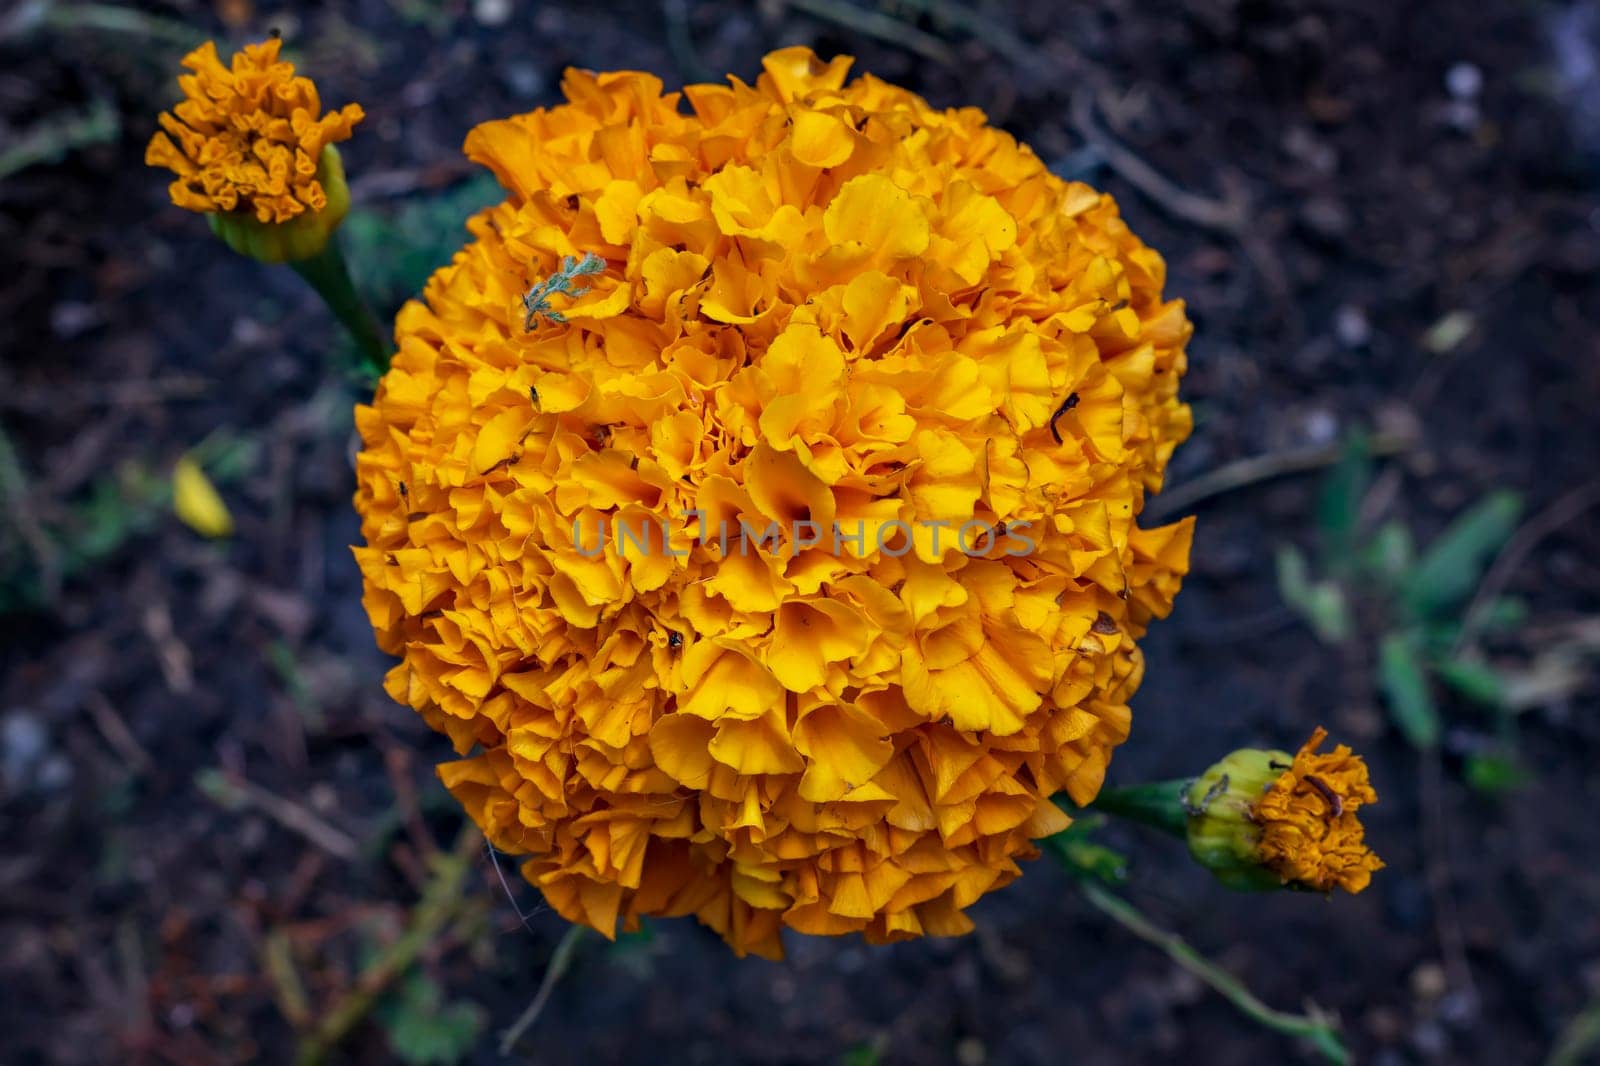 Marigolds, Tagetes erecta flowers in the garden close up